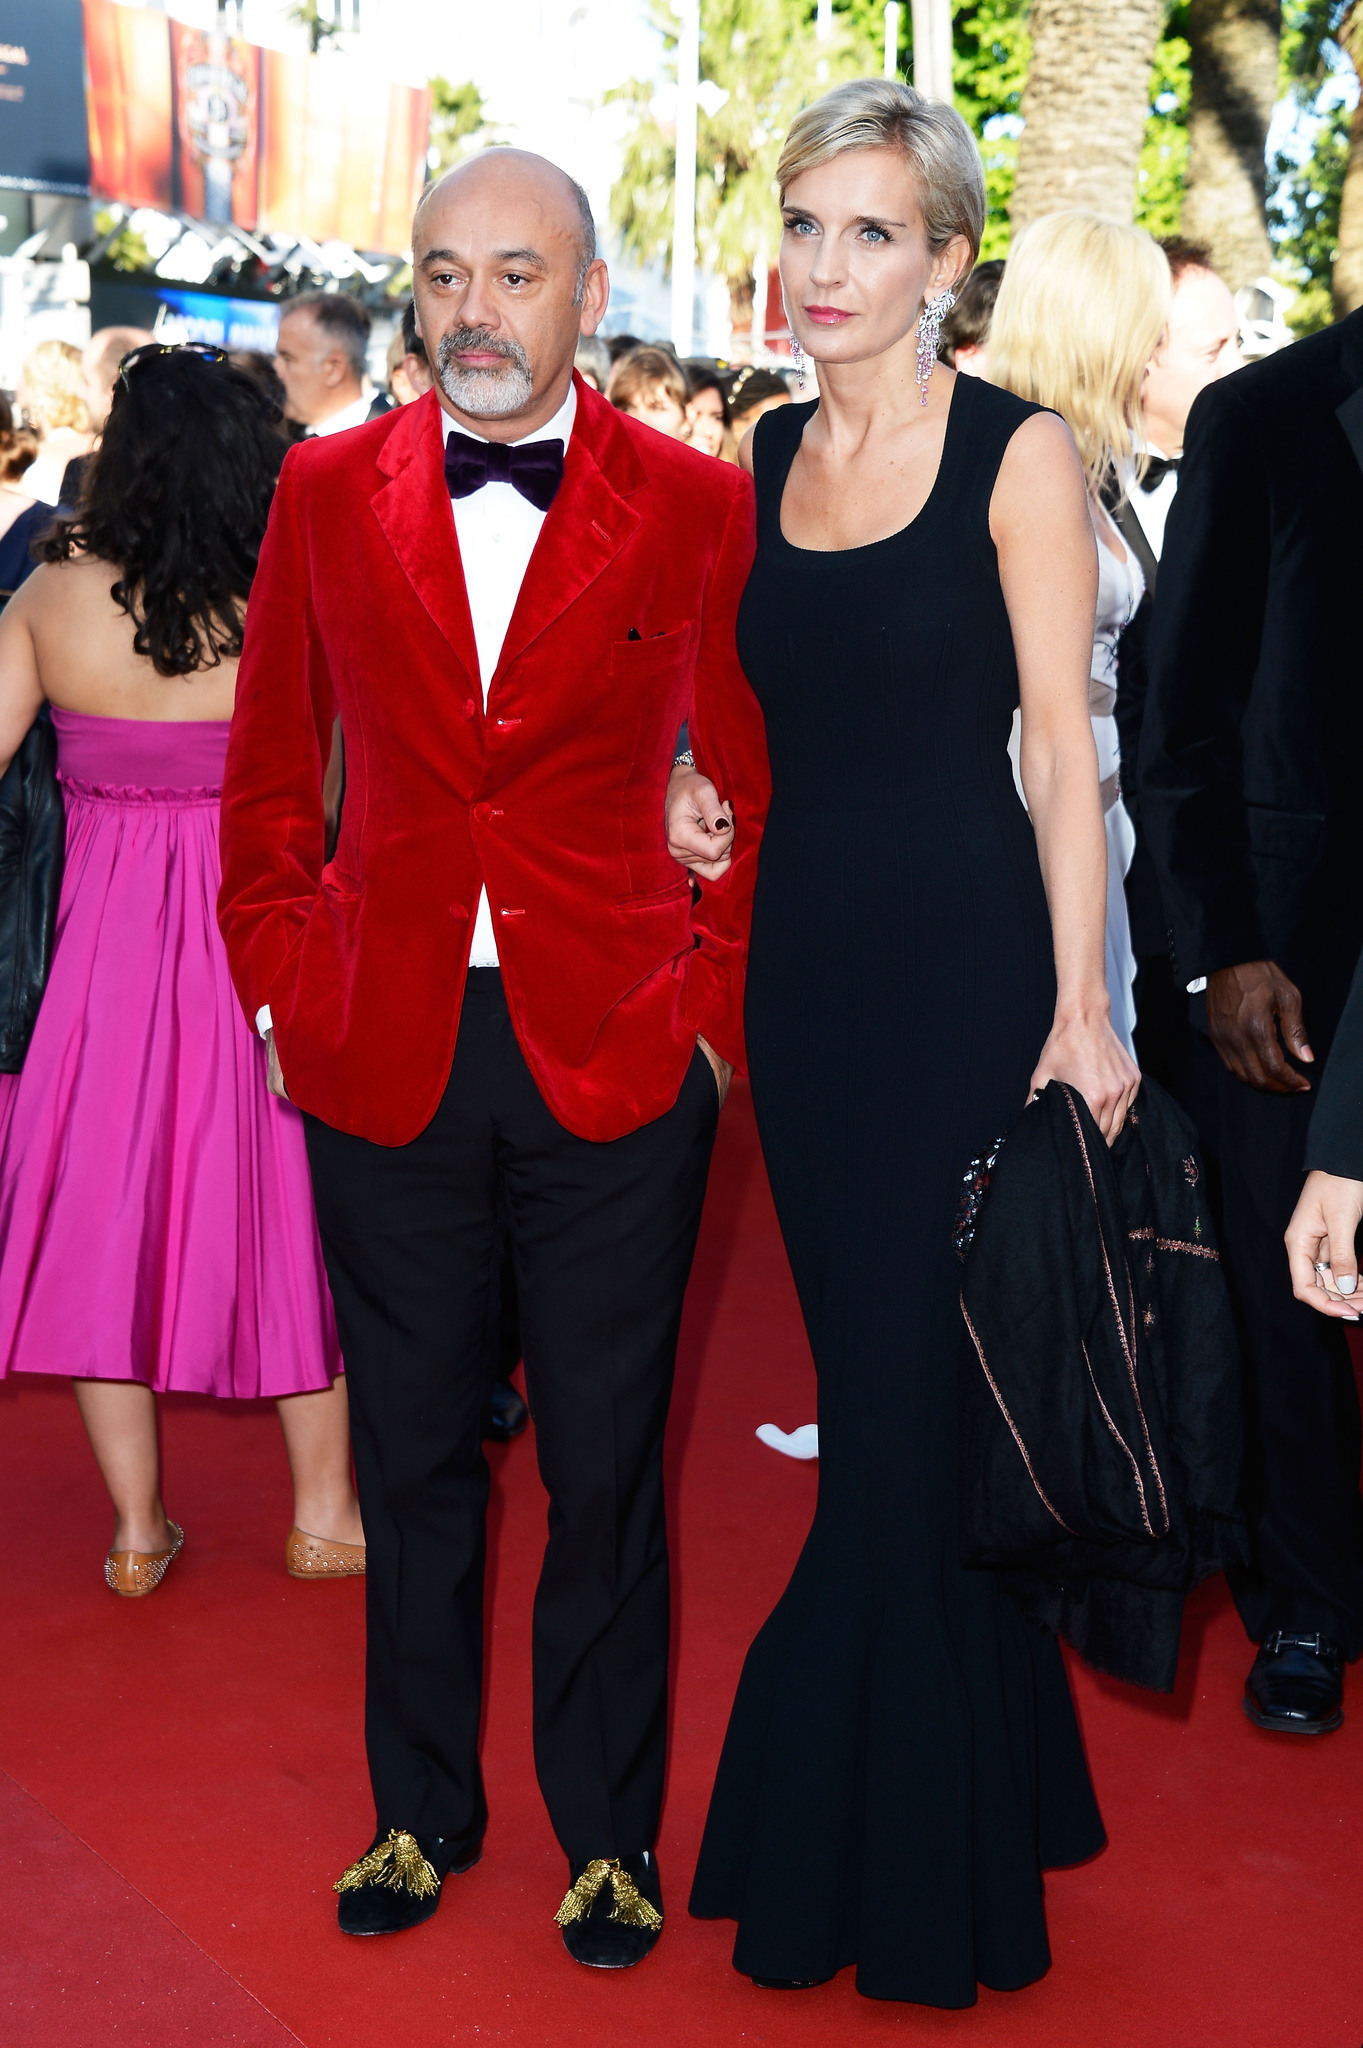 hristian Louboutin and Melita Toscan du Plantier attend the Premiere of 'Le Passe' (The Past) during The 66th Annual Cannes Film Festival at Palais des Festivals on May 17, 2013 in Cannes, France.